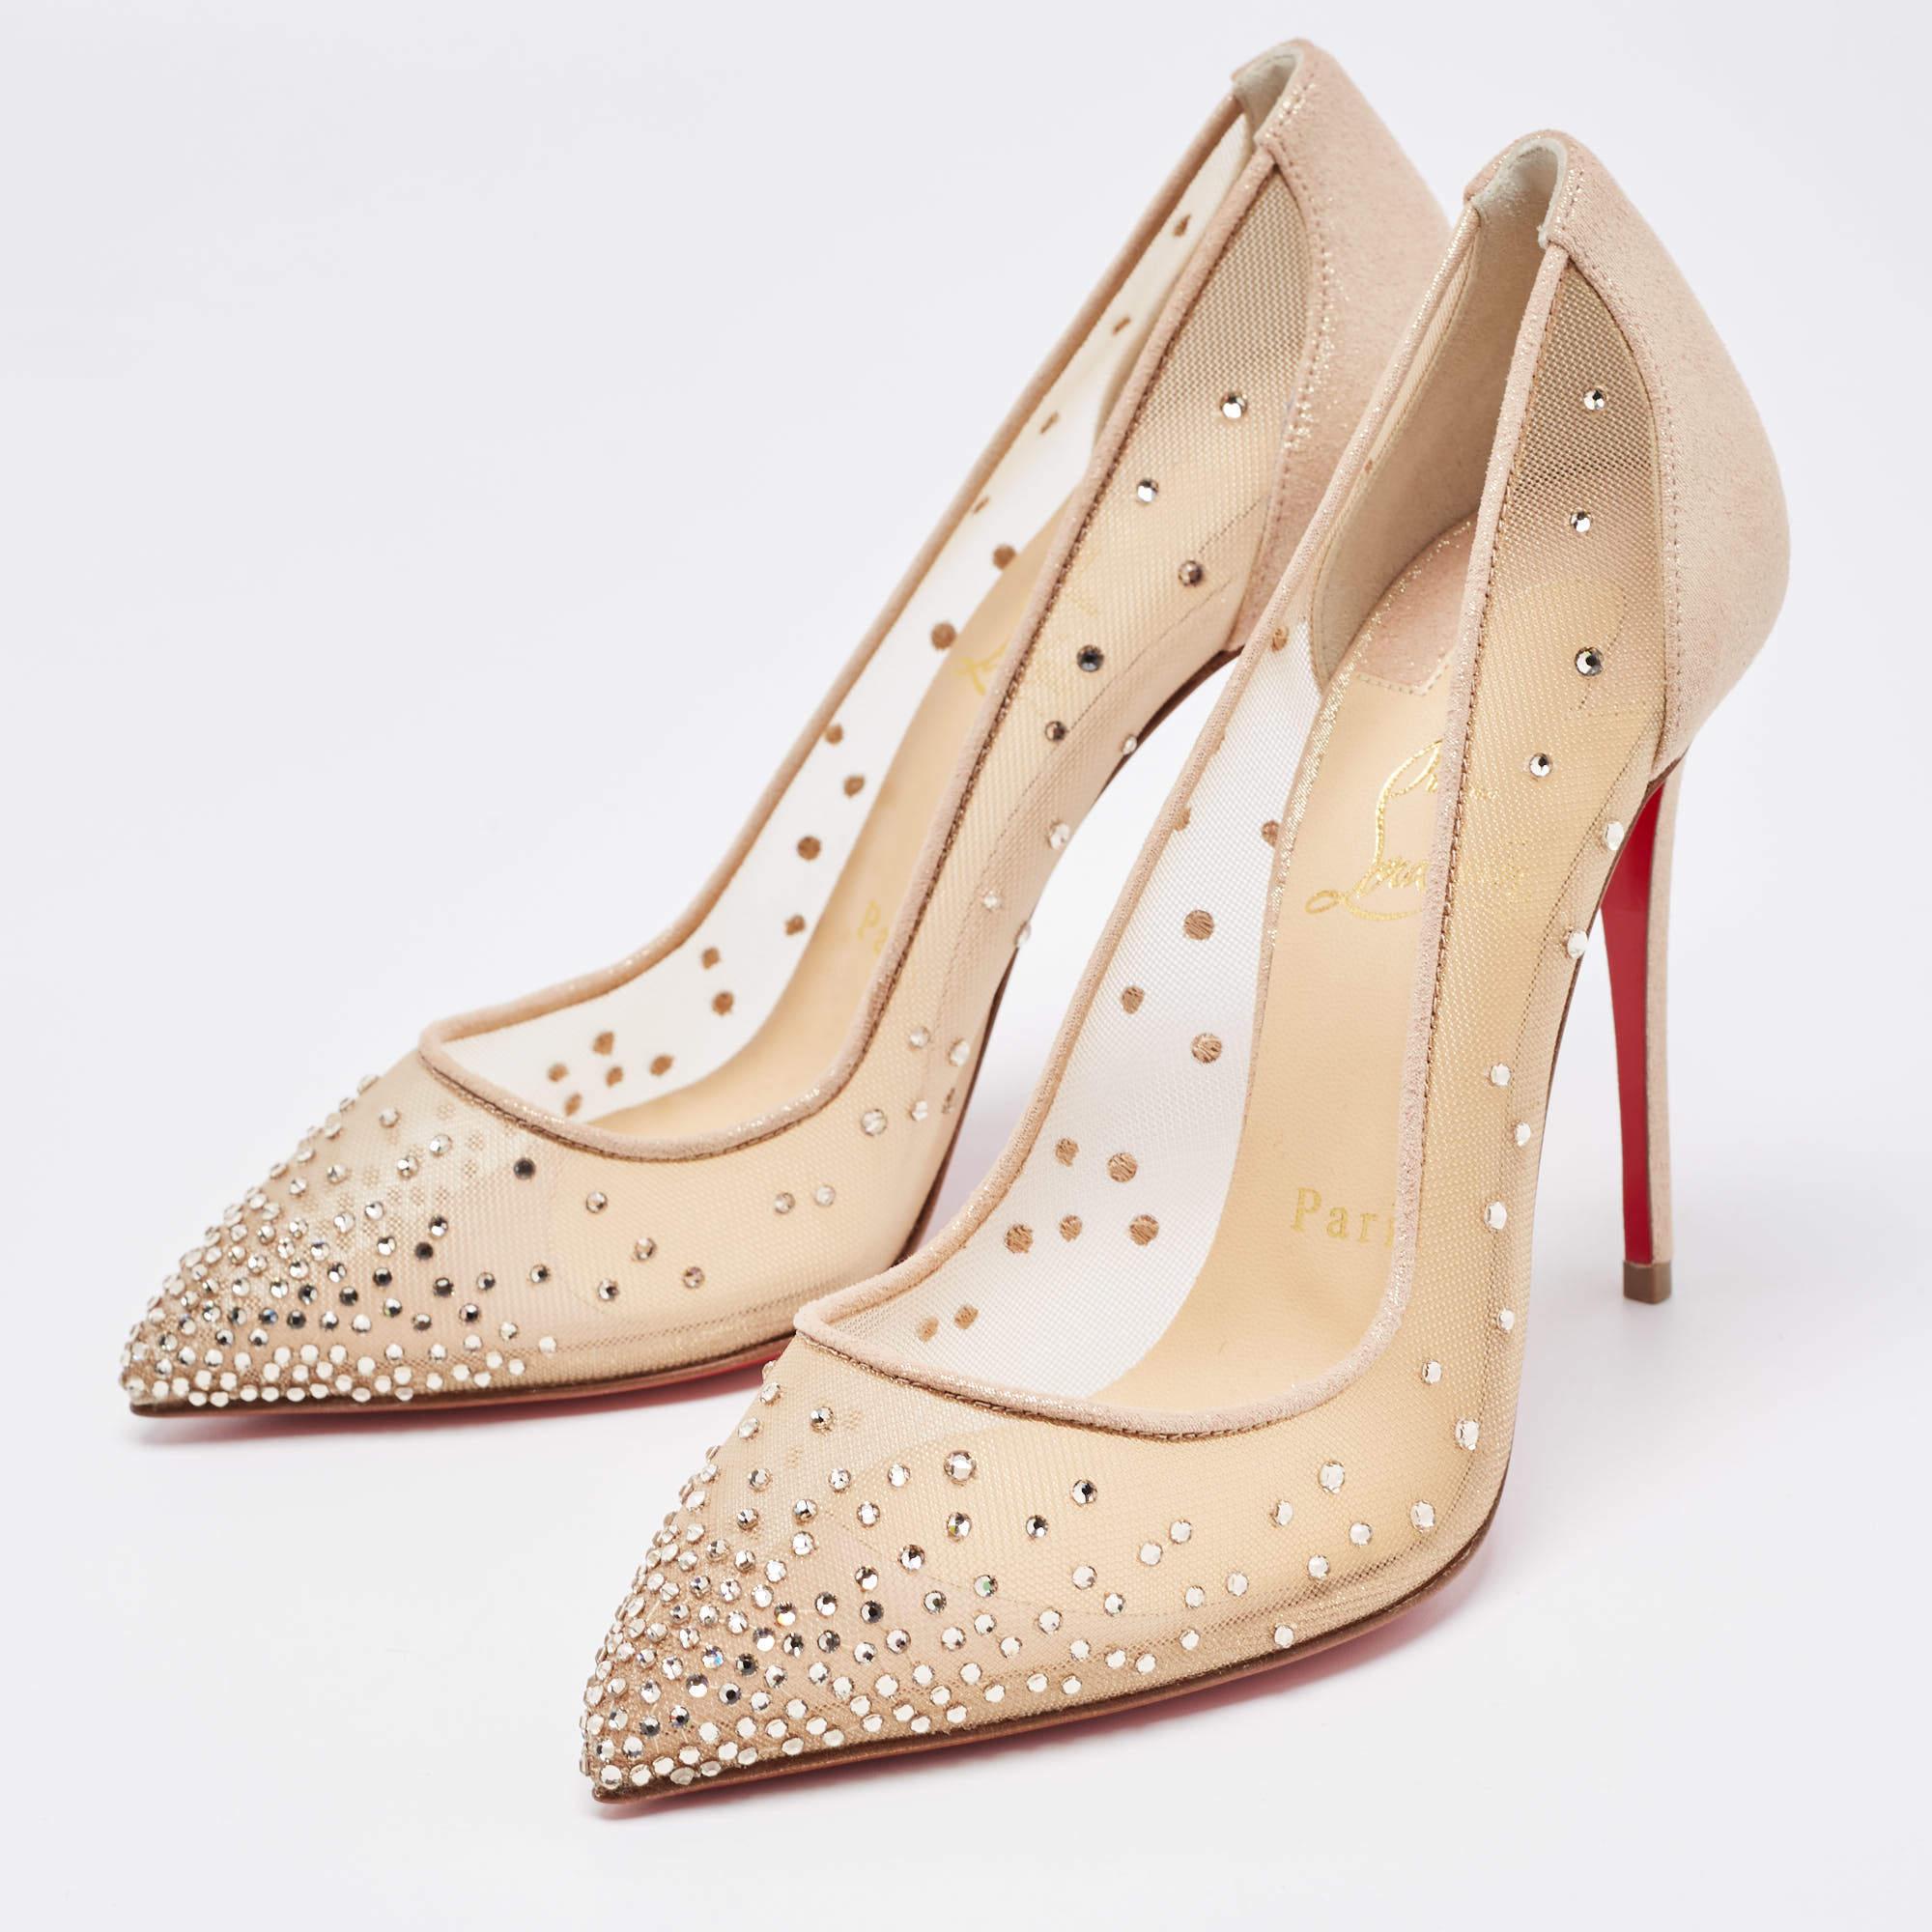 Christian Louboutin Beige Mesh and Suede Follies Strass Pumps Size 37 1